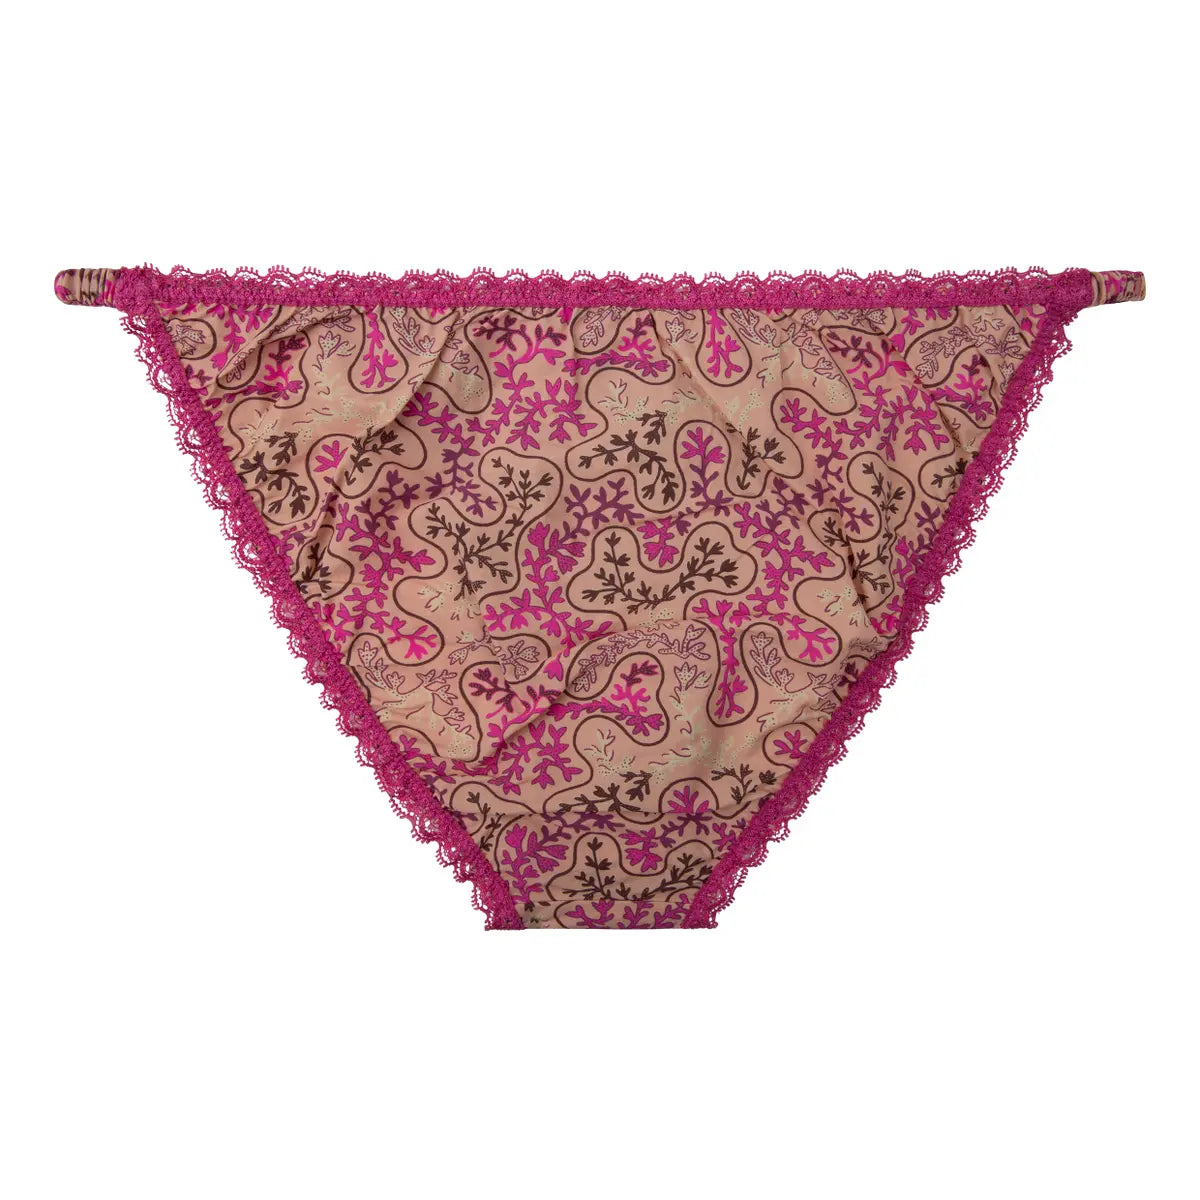 Isabel Tanga-Style Briefs